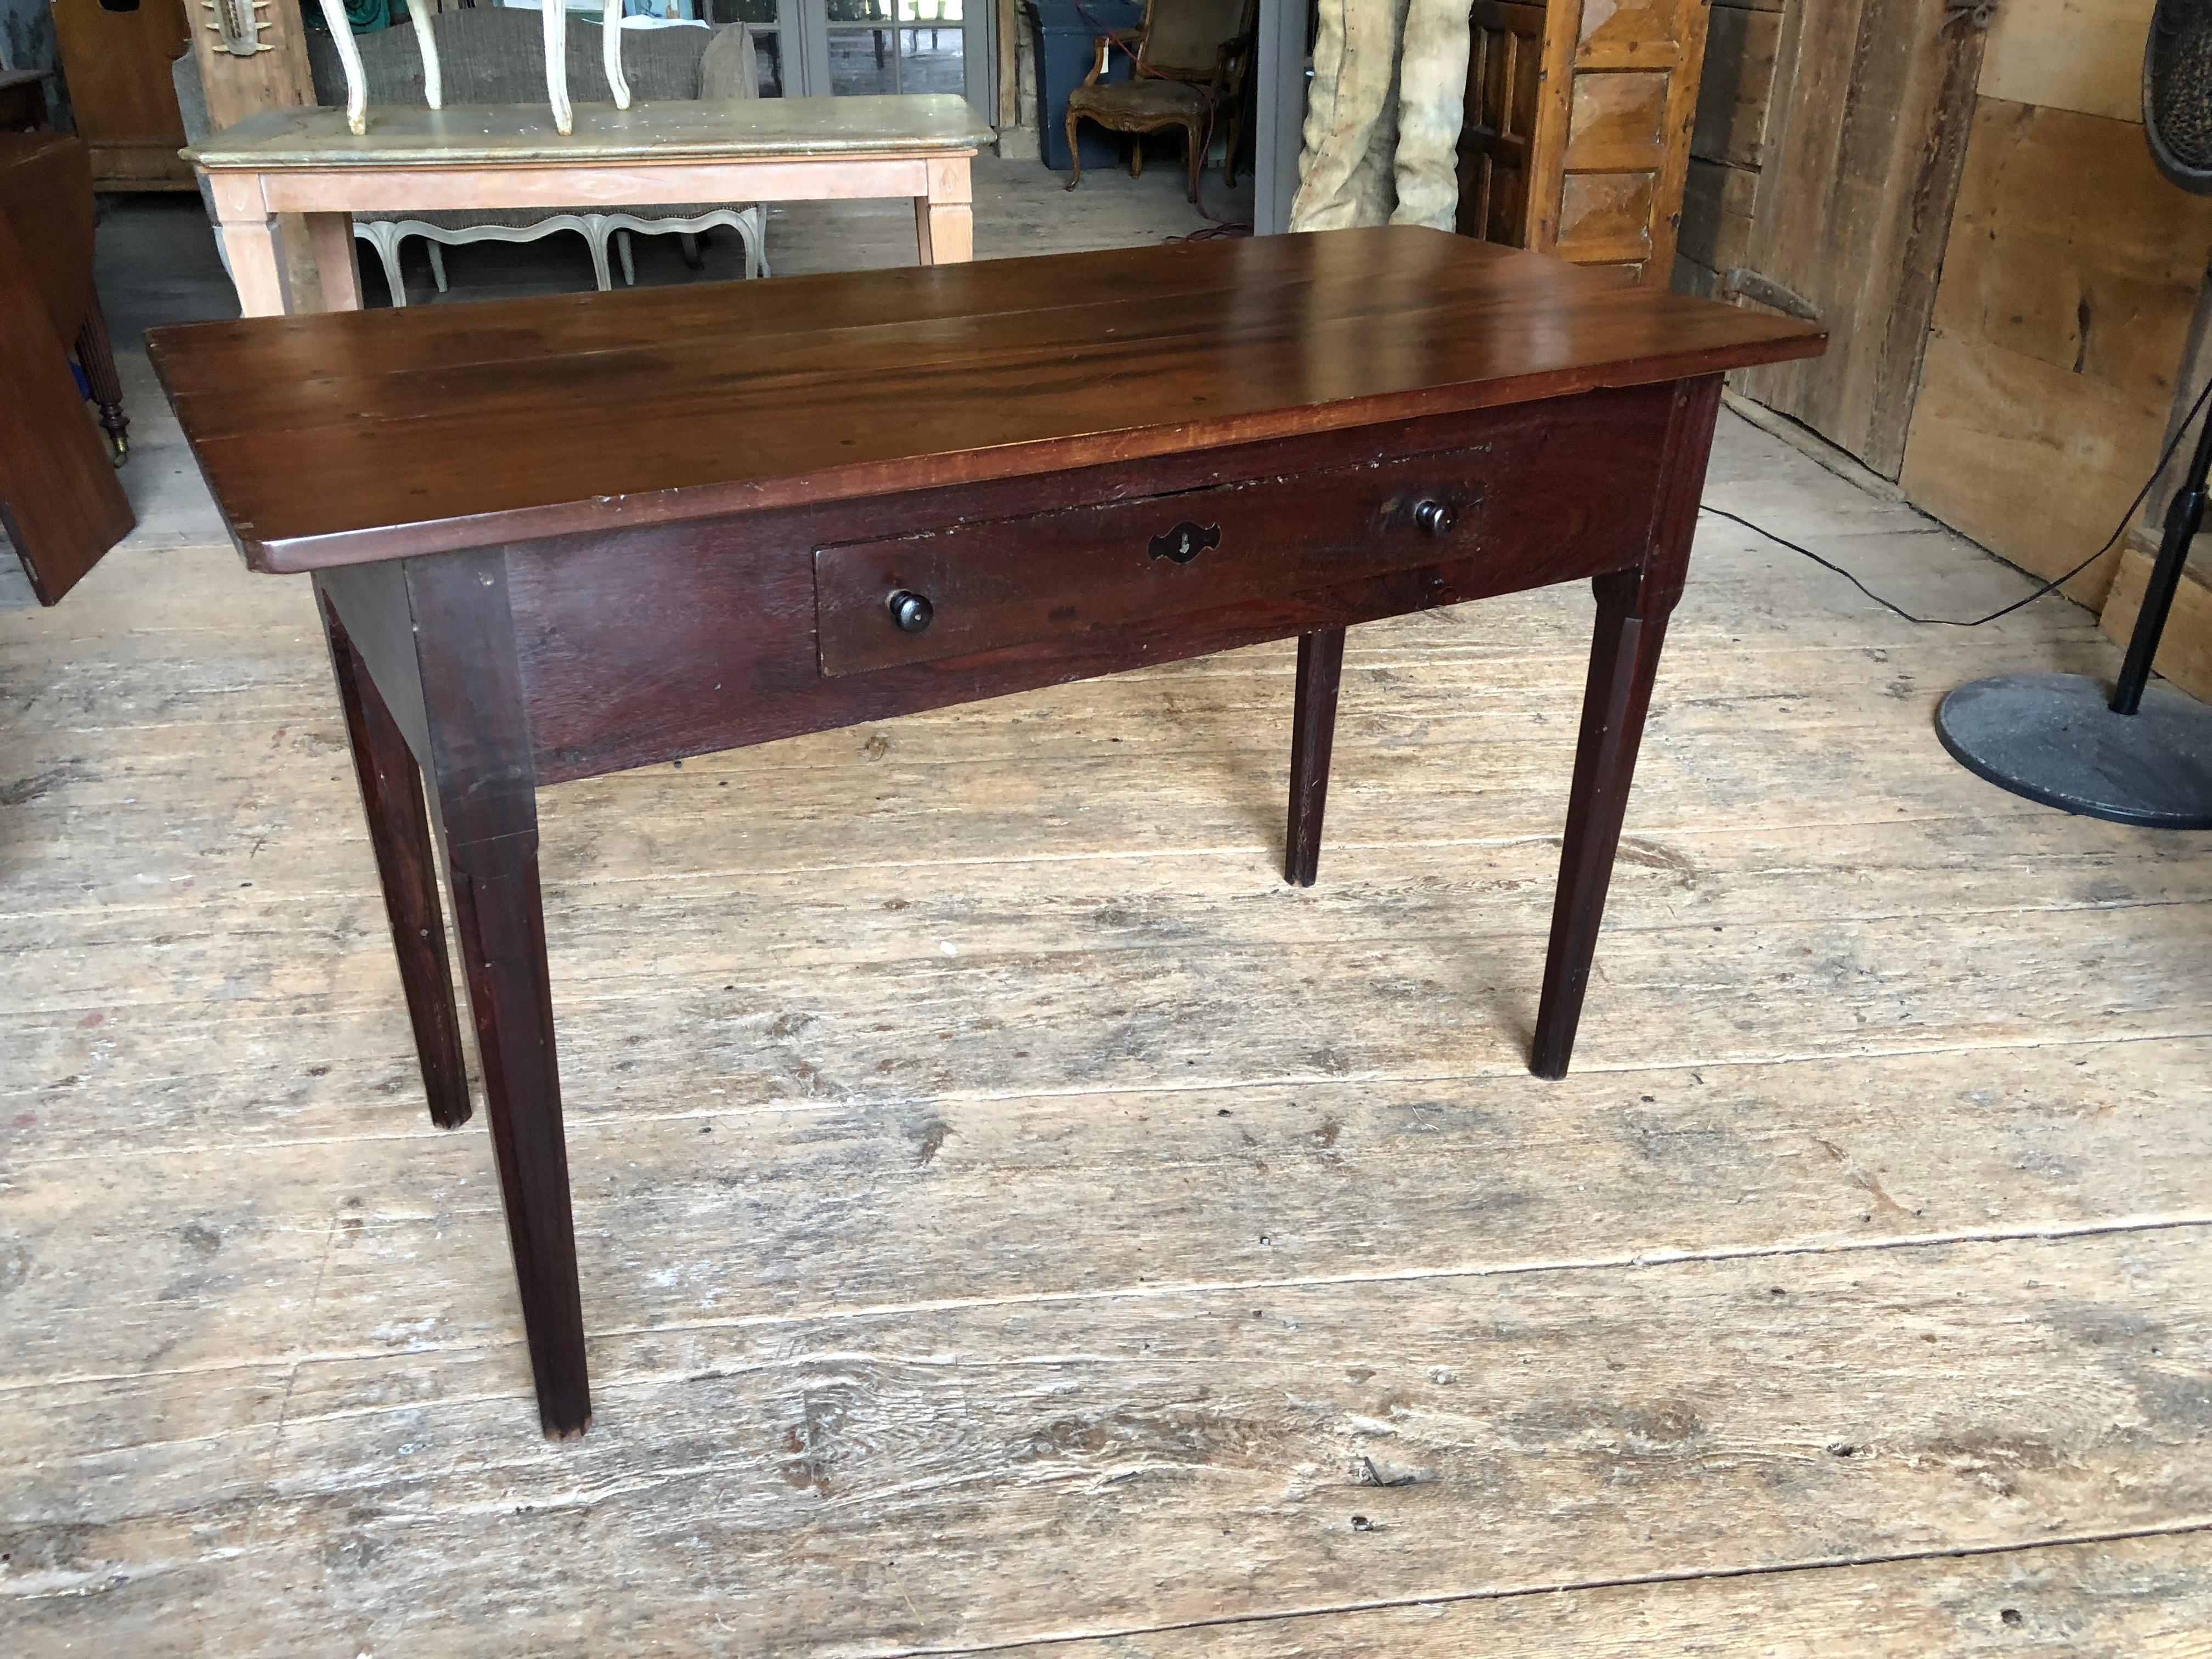 A Provincial English Regency period serving table in solid old growth Cuban mahogany, circa 1840, with chamfered legs and a single drawer in the apron.